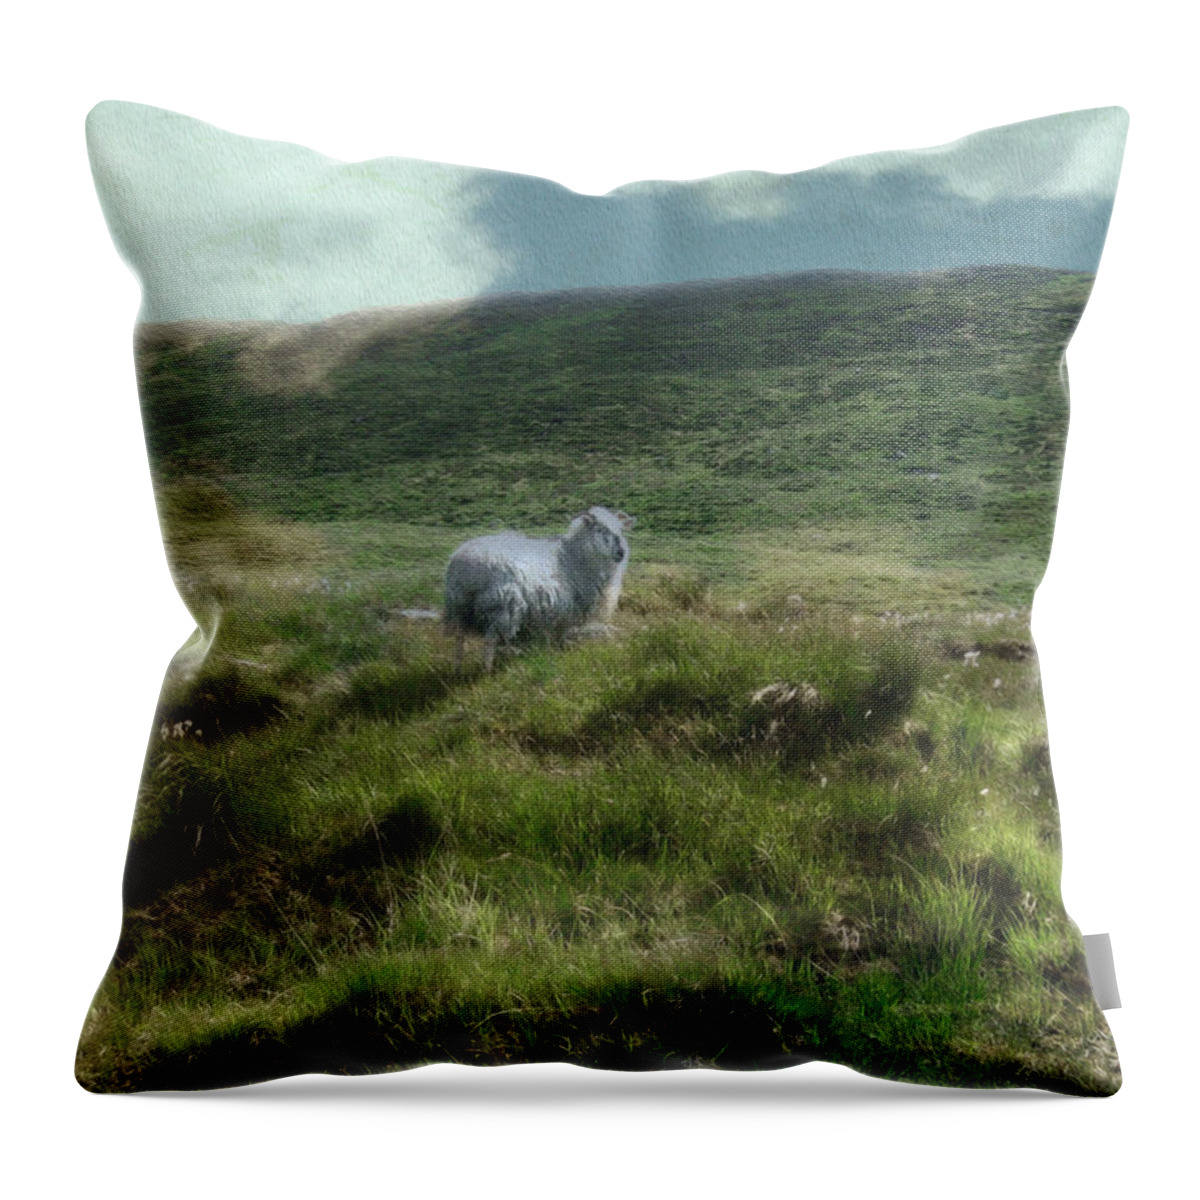 Sepia Throw Pillow featuring the photograph Irish Countryside by Kandy Hurley